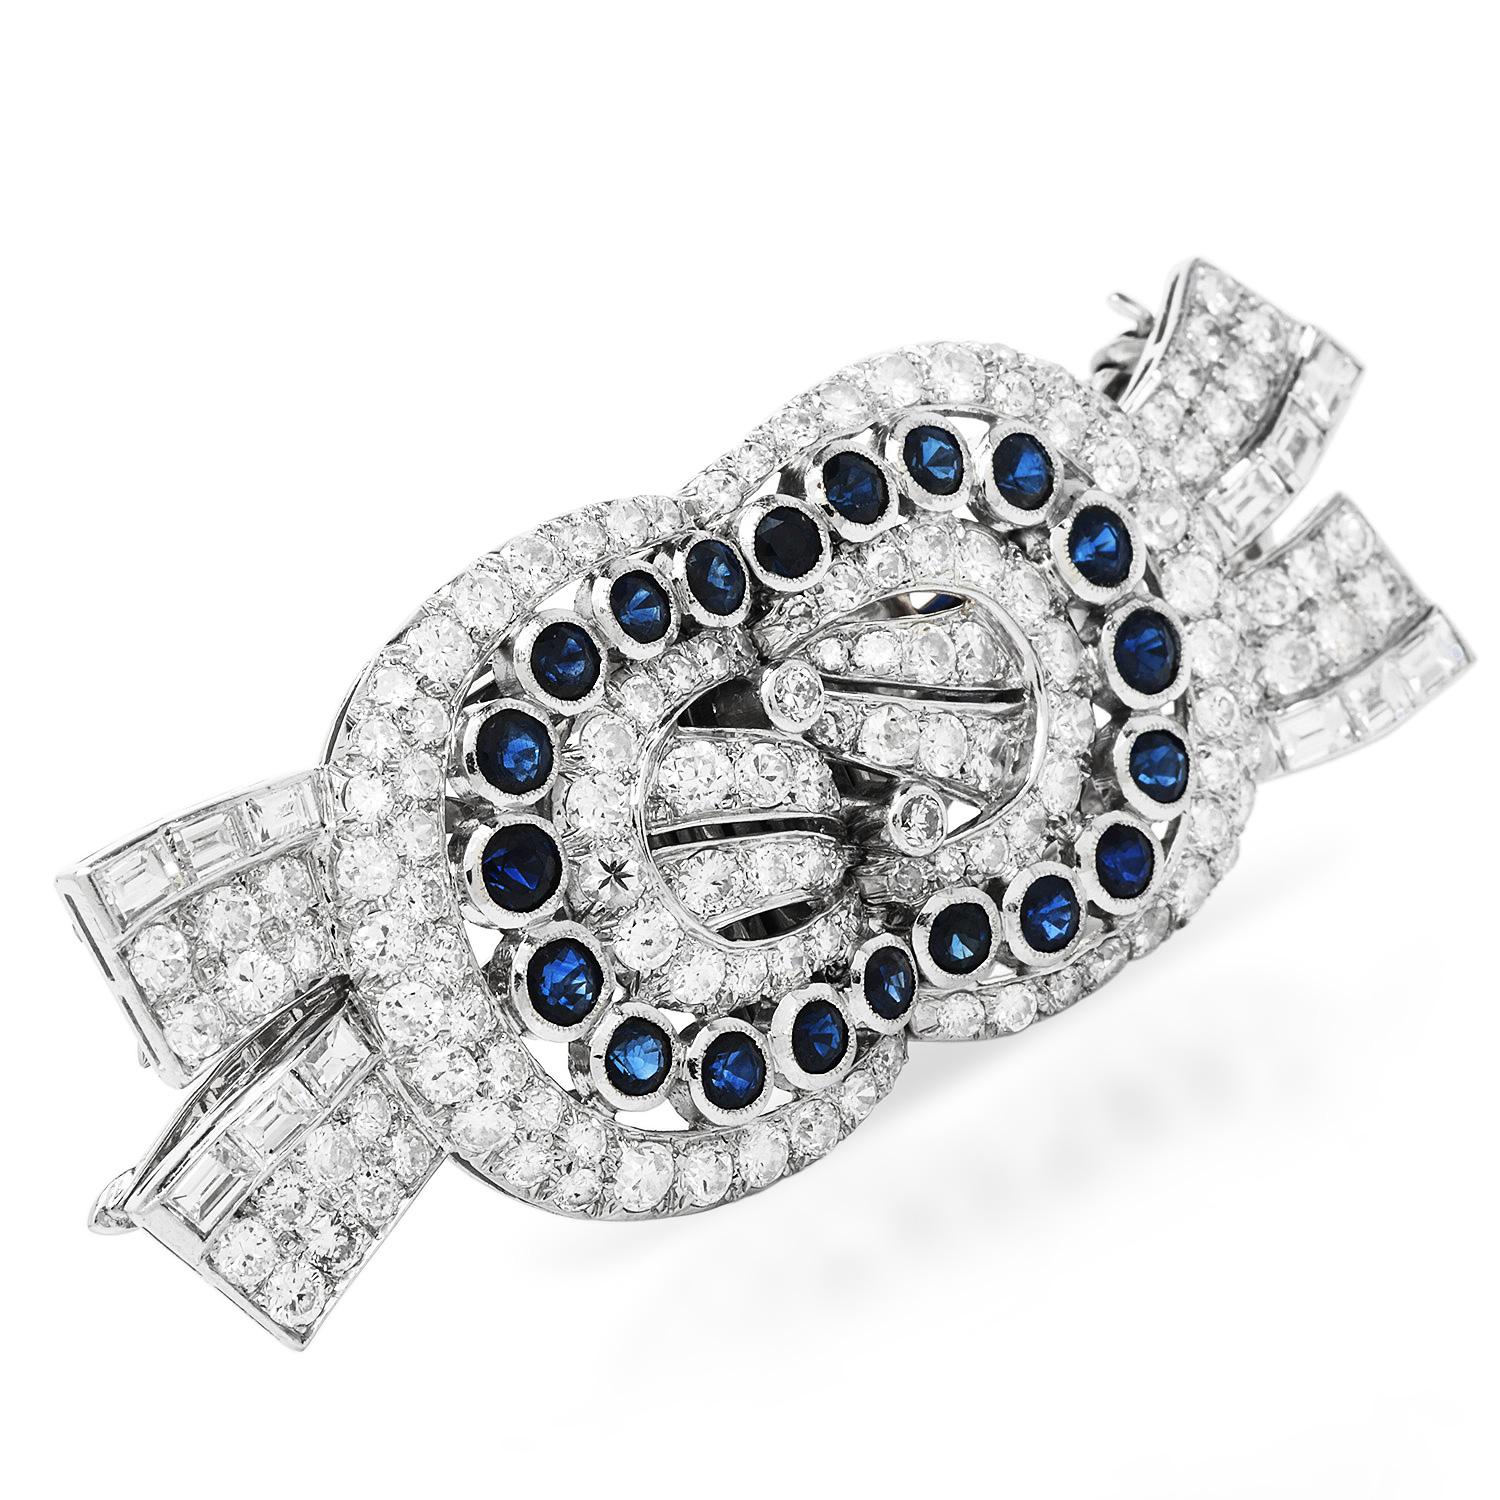 This fine Art deco Double Brooch set from the 1930s, was inspired by a Double Ribbon motif and crafted in luxurious Platinum.

Featuring all over the piece 134 old round cut diamonds & 12 Baguette-cut Diamonds, pave & channel set,  weighing approx